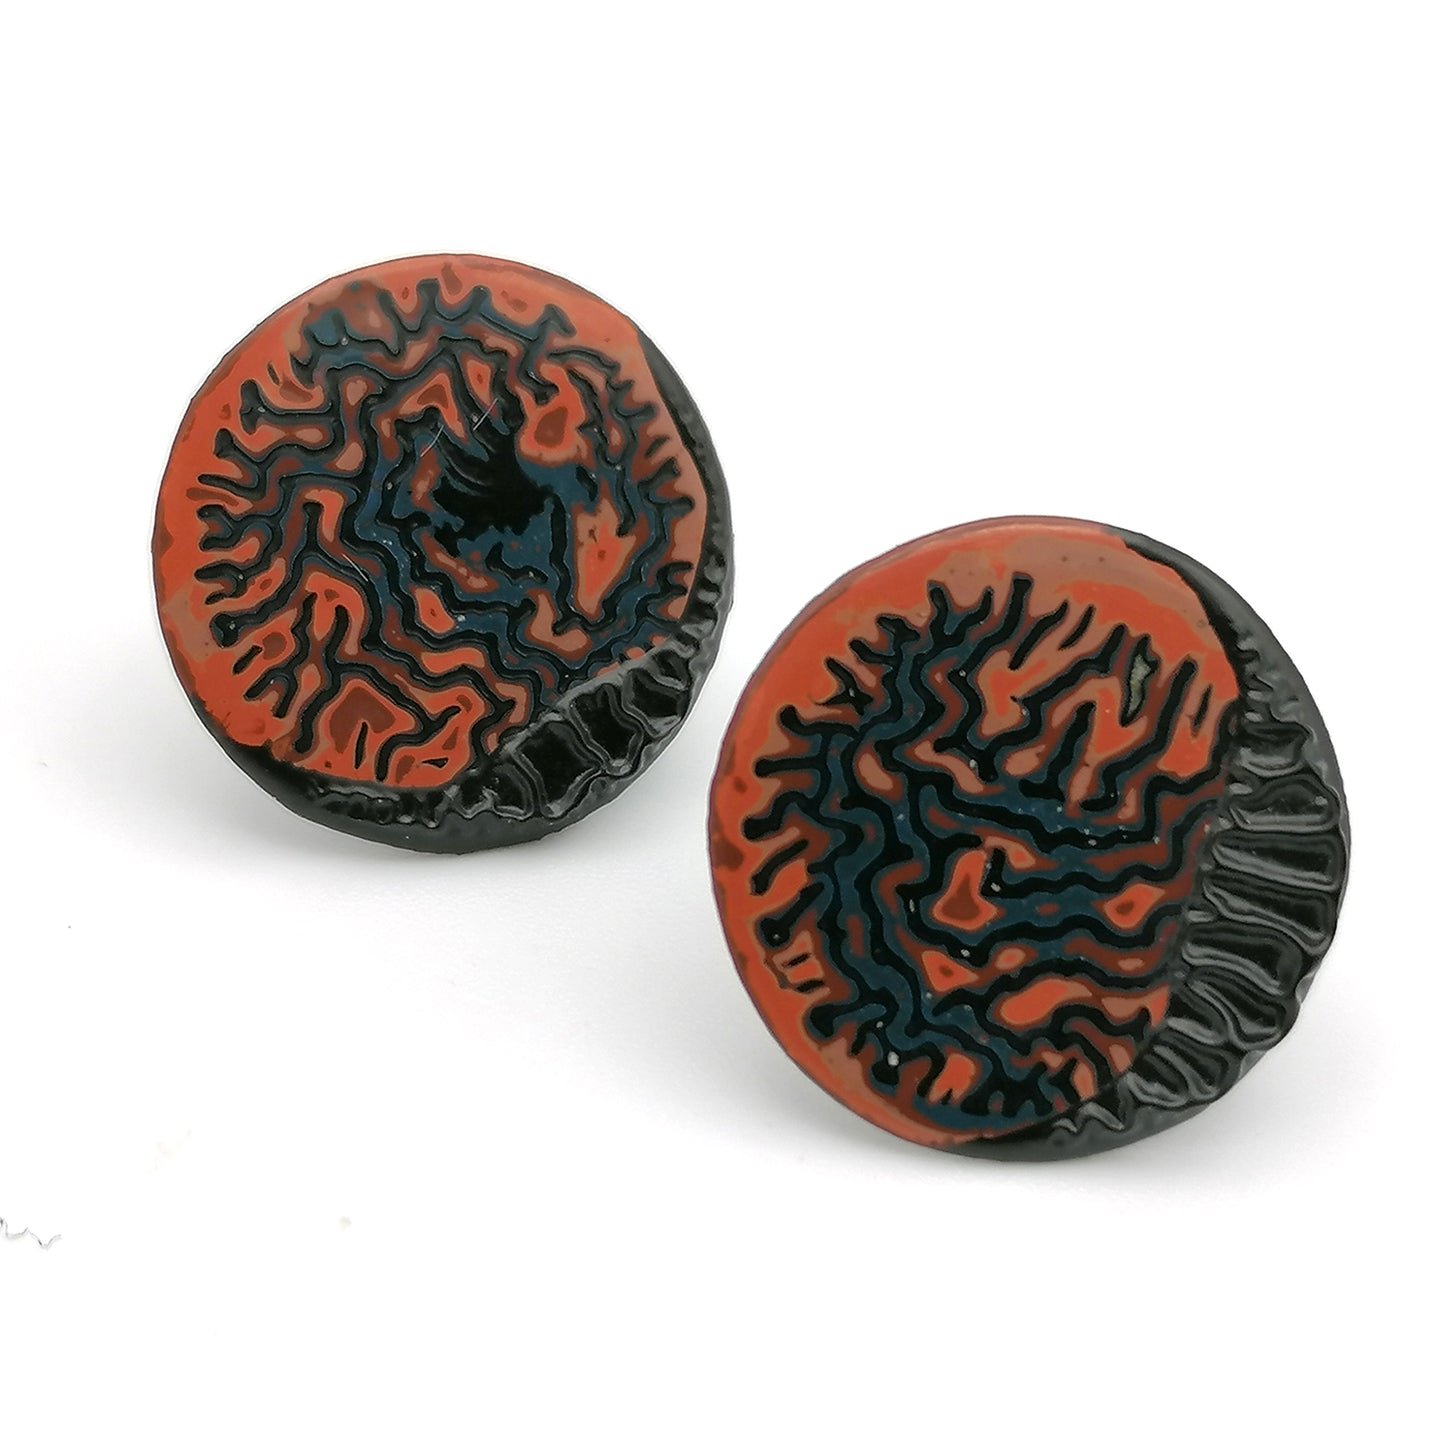 Image shows a pair of circle stud earrings on a white background. With a wrinkled pattern in orange, blue and red and a raised black winkle textured rim.